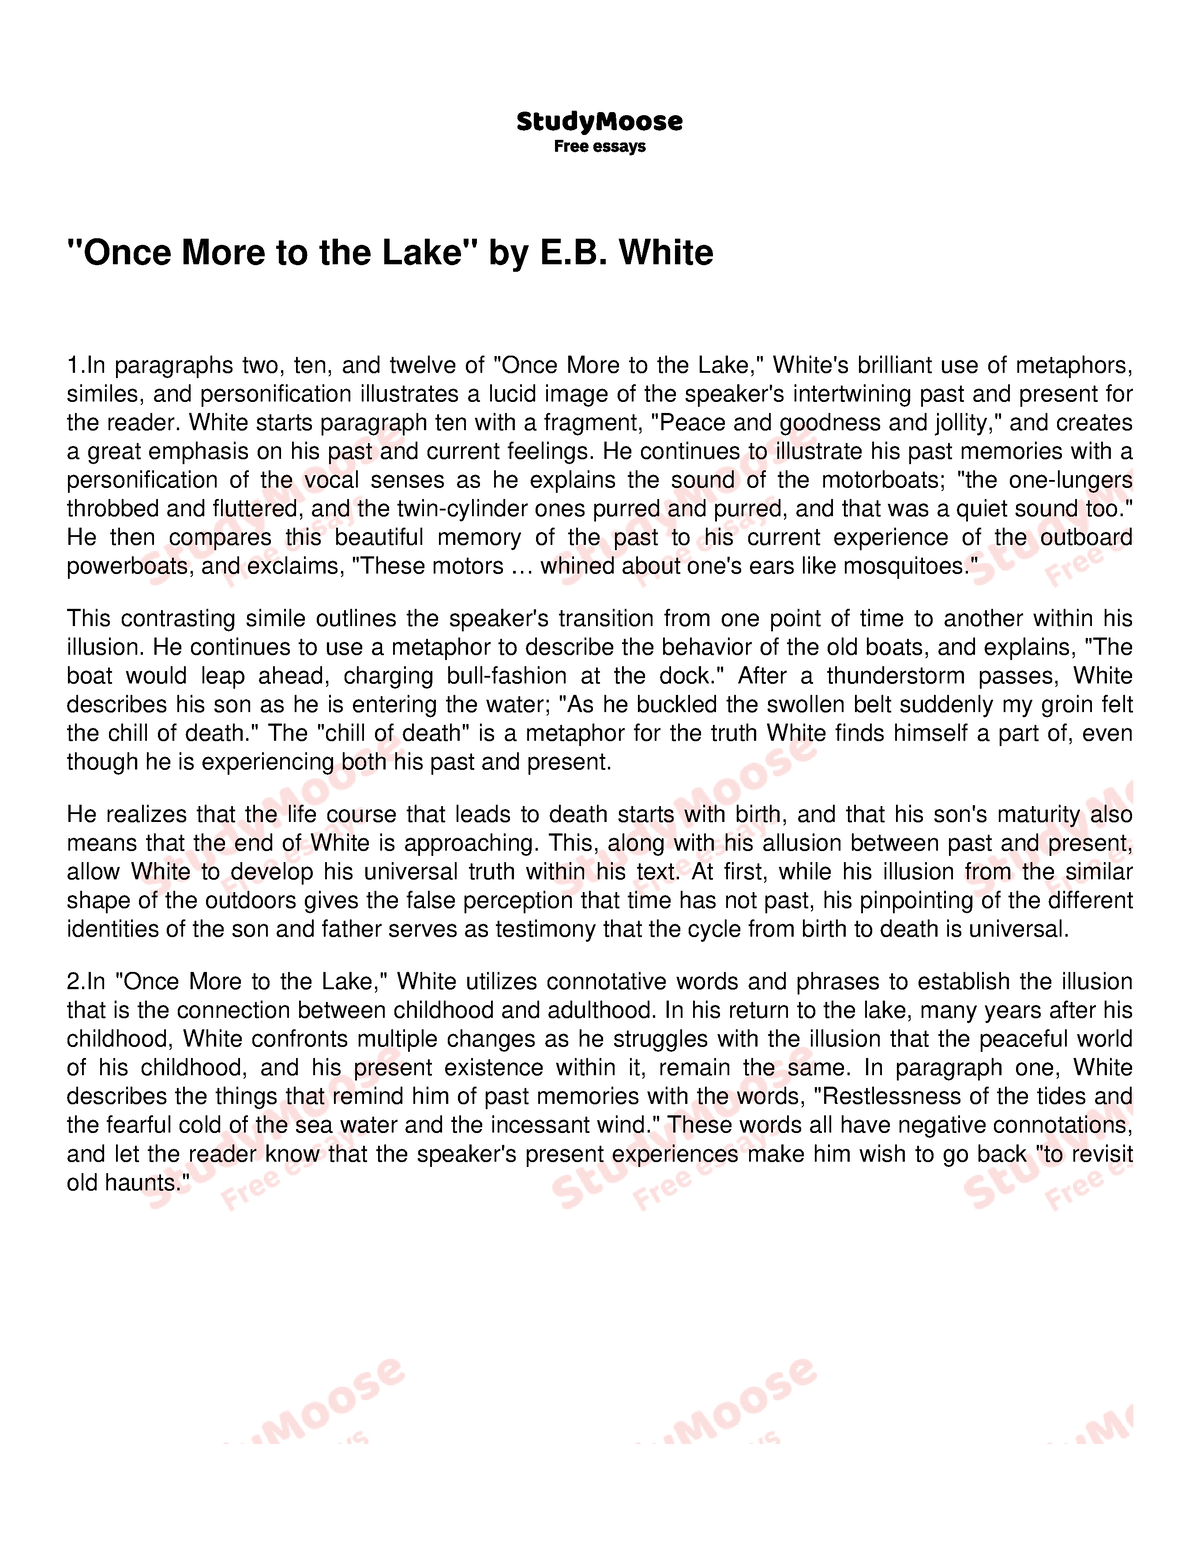 literary analysis essay once more to the lake